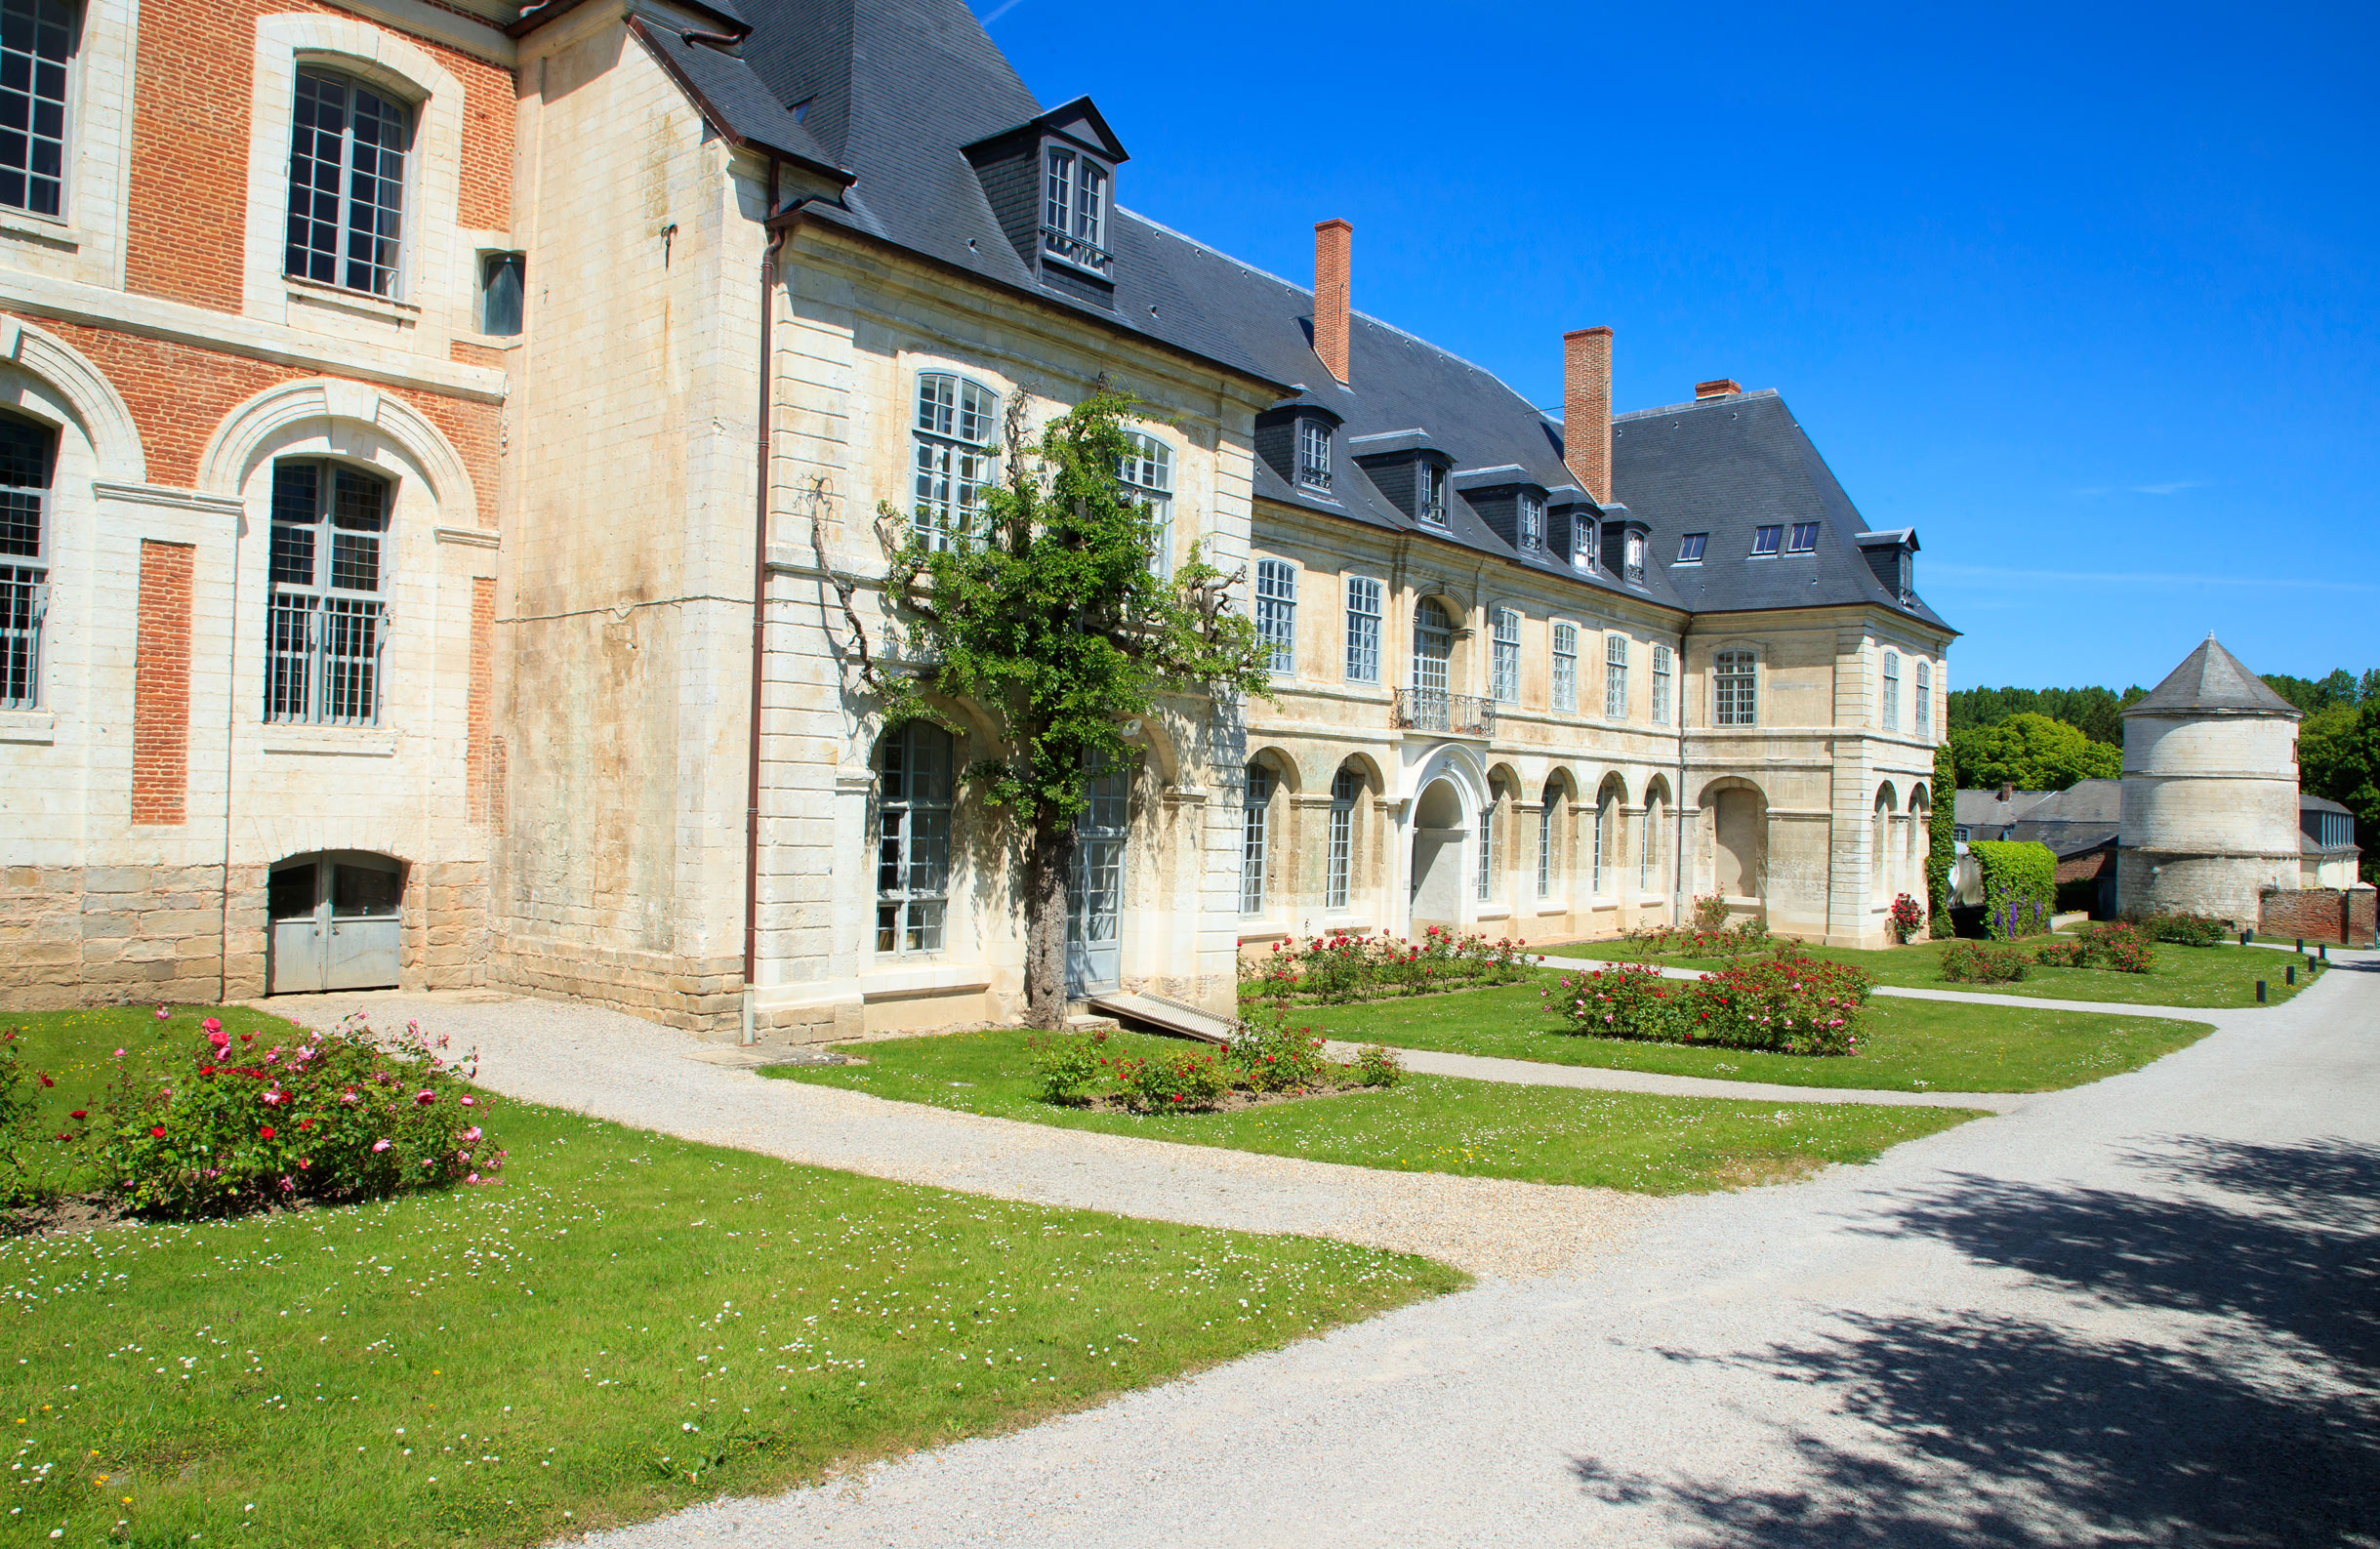 Abbaye-de-Valloires abbey in Northern France ‒ not just somewhere to visit but somewhere to spend a special night too   